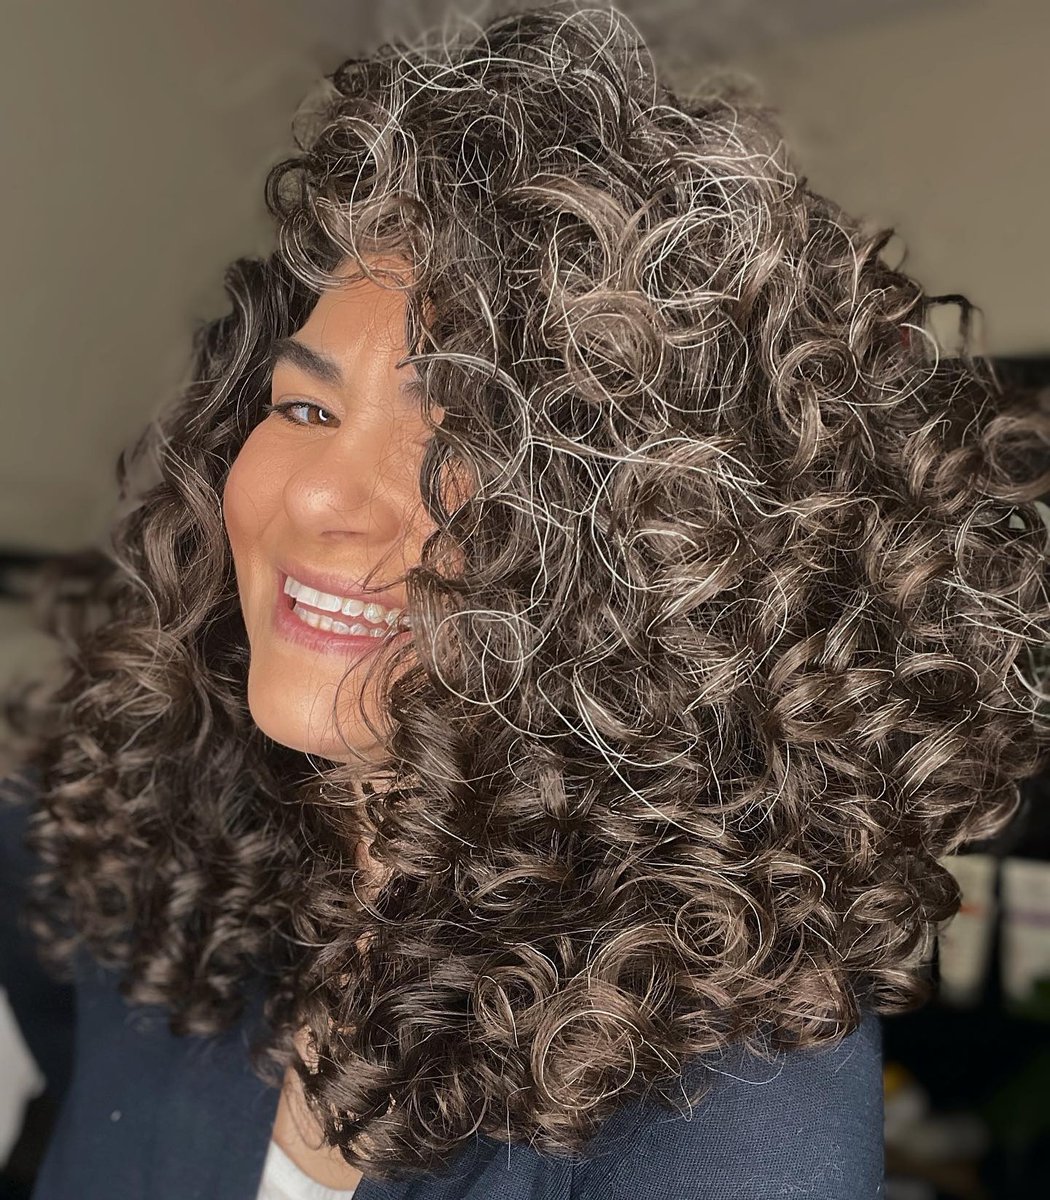 Can you guess which one of our stylers was apart of her styling routine?
.⁣
Instagram: bigcurls_gabby 
#bouncecurl #hairproducts